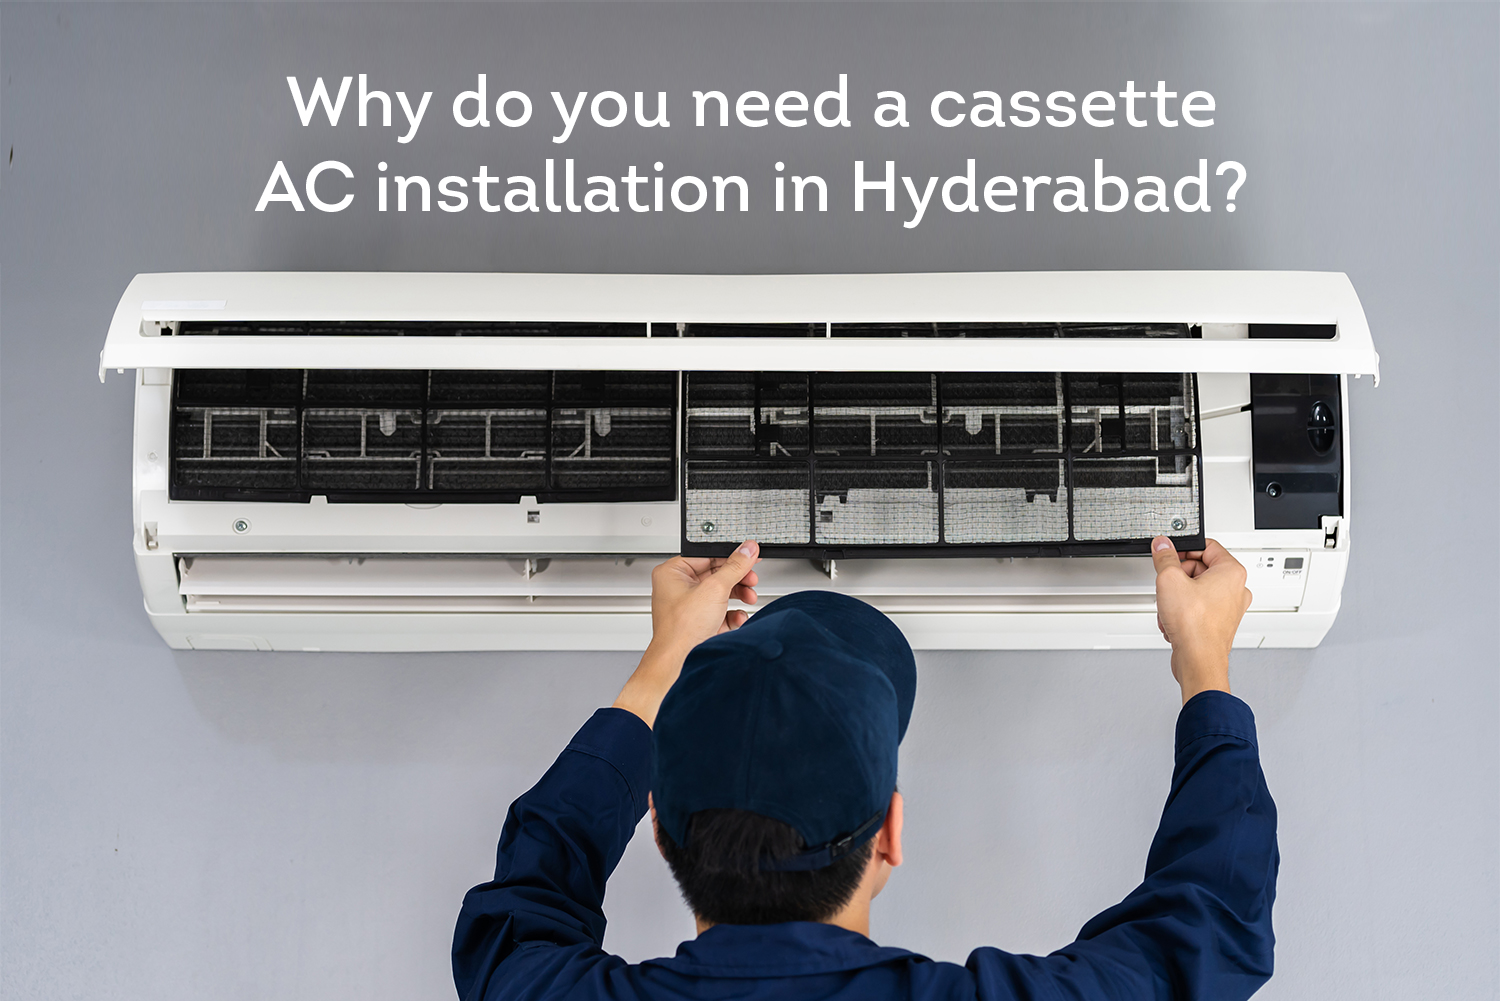 Why Do you Need a Cassette AC Installation in Hyderabad?